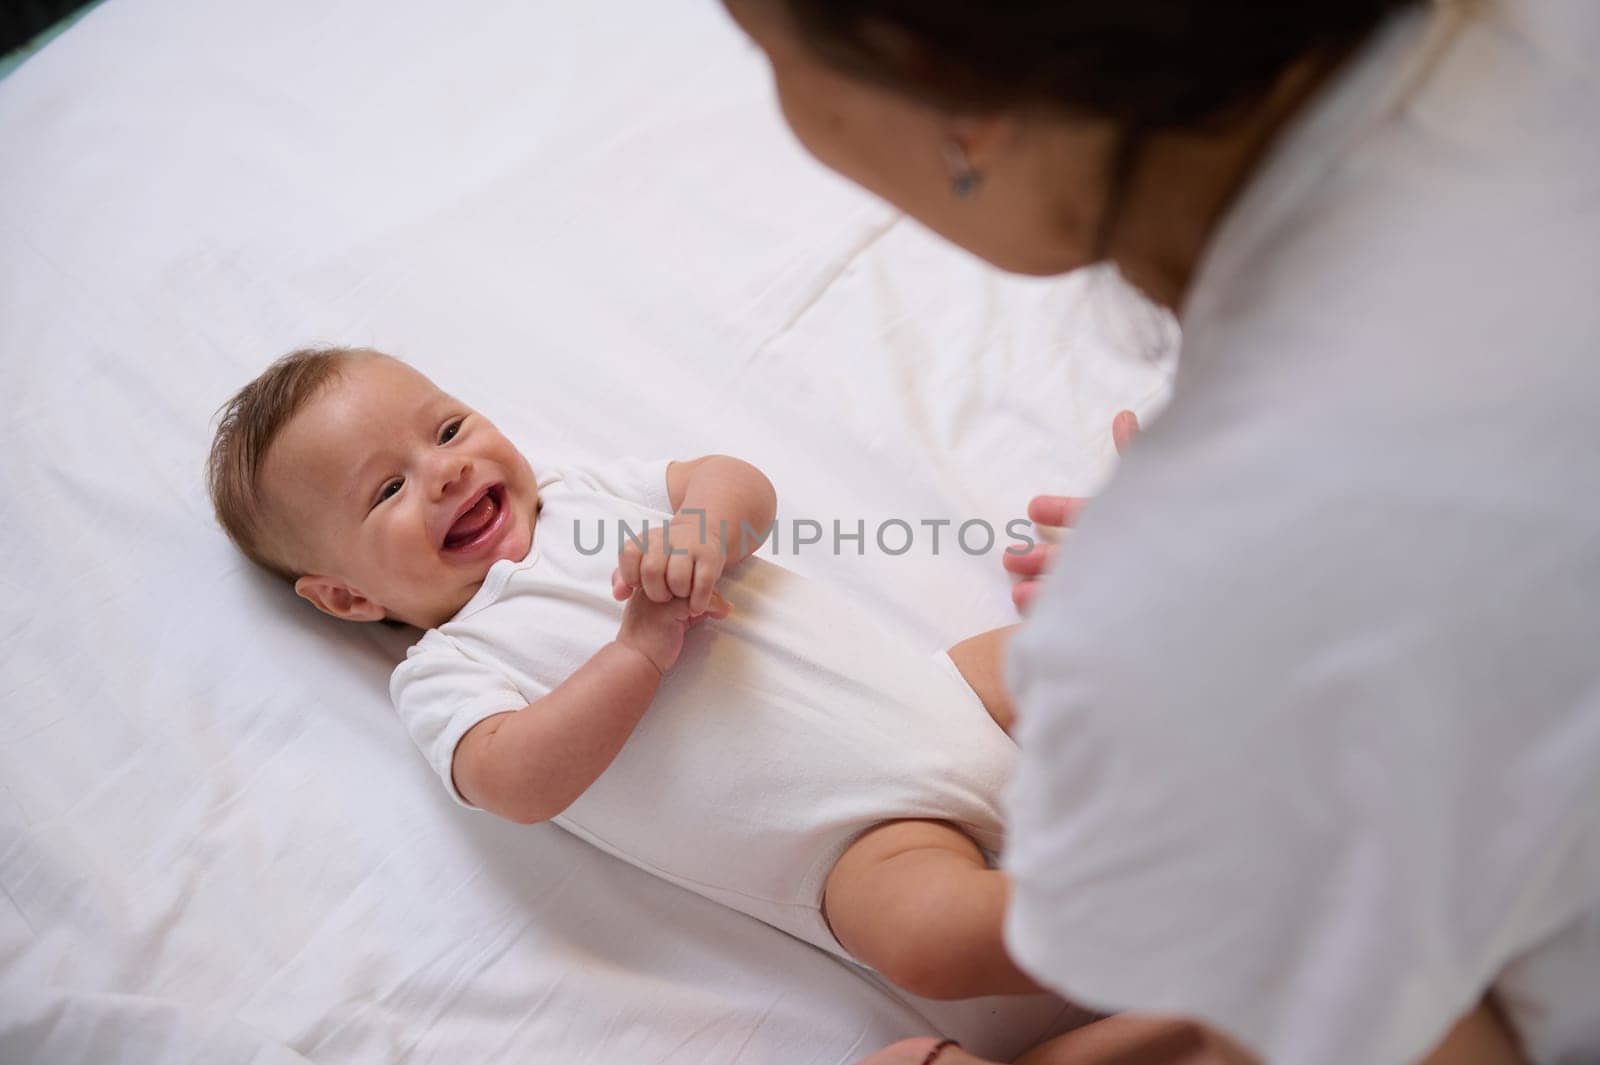 View from above of a playful little baby boy 4 month old holding hands together, laughing, smiling, catching emotions of his loving caring mother. Smiling baby